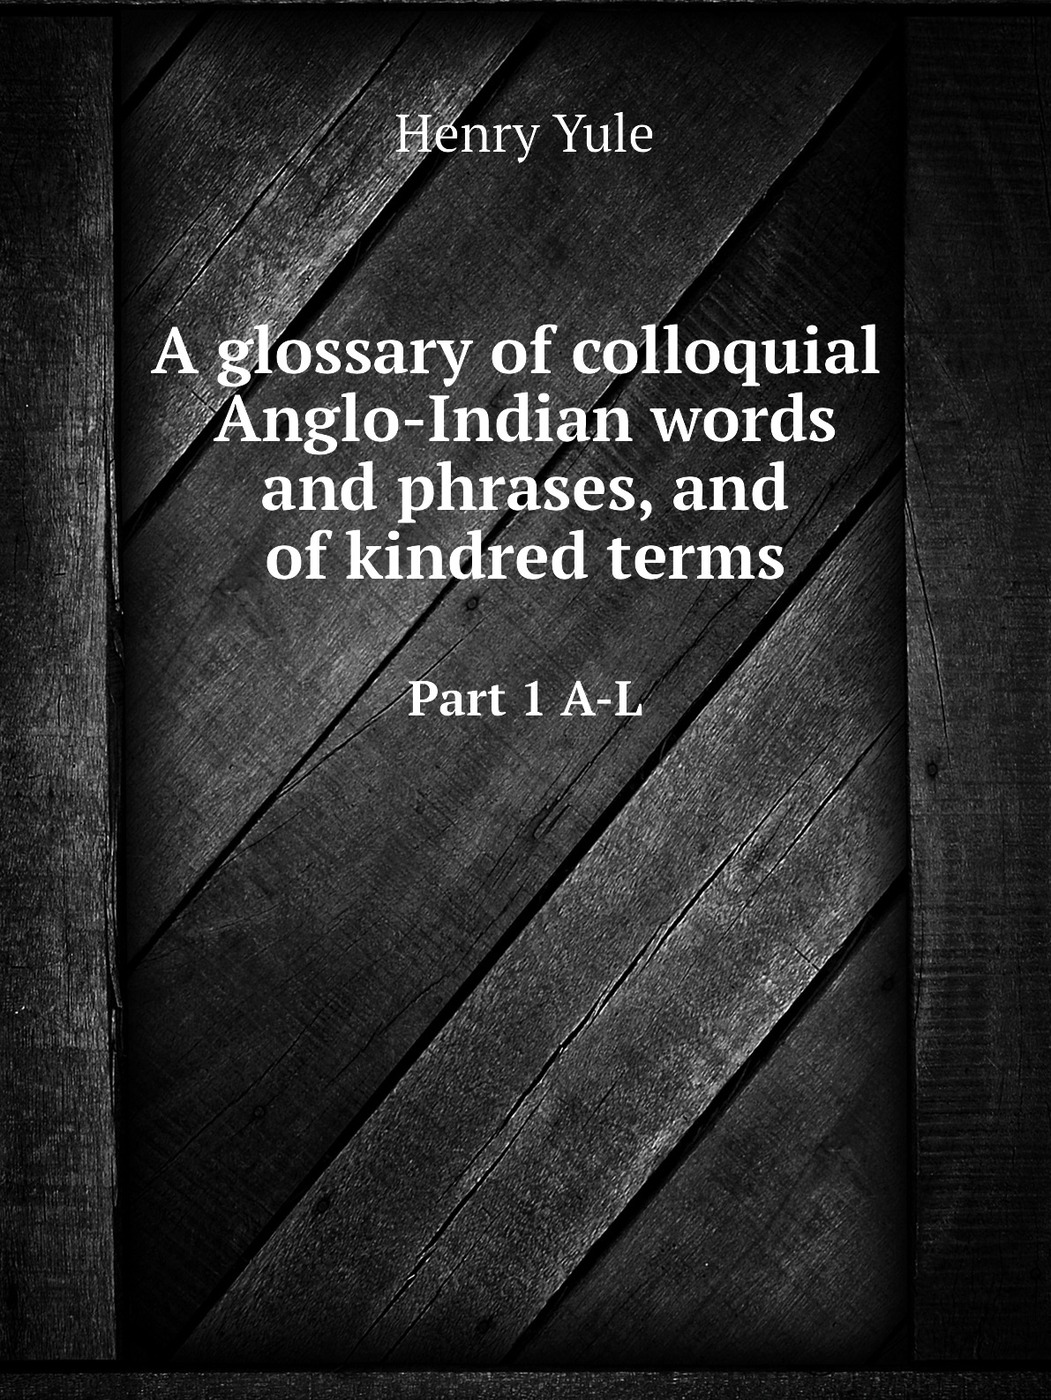 A glossary of colloquial Anglo-Indian words and phrases, and of kindred terms. Part 1 A-L